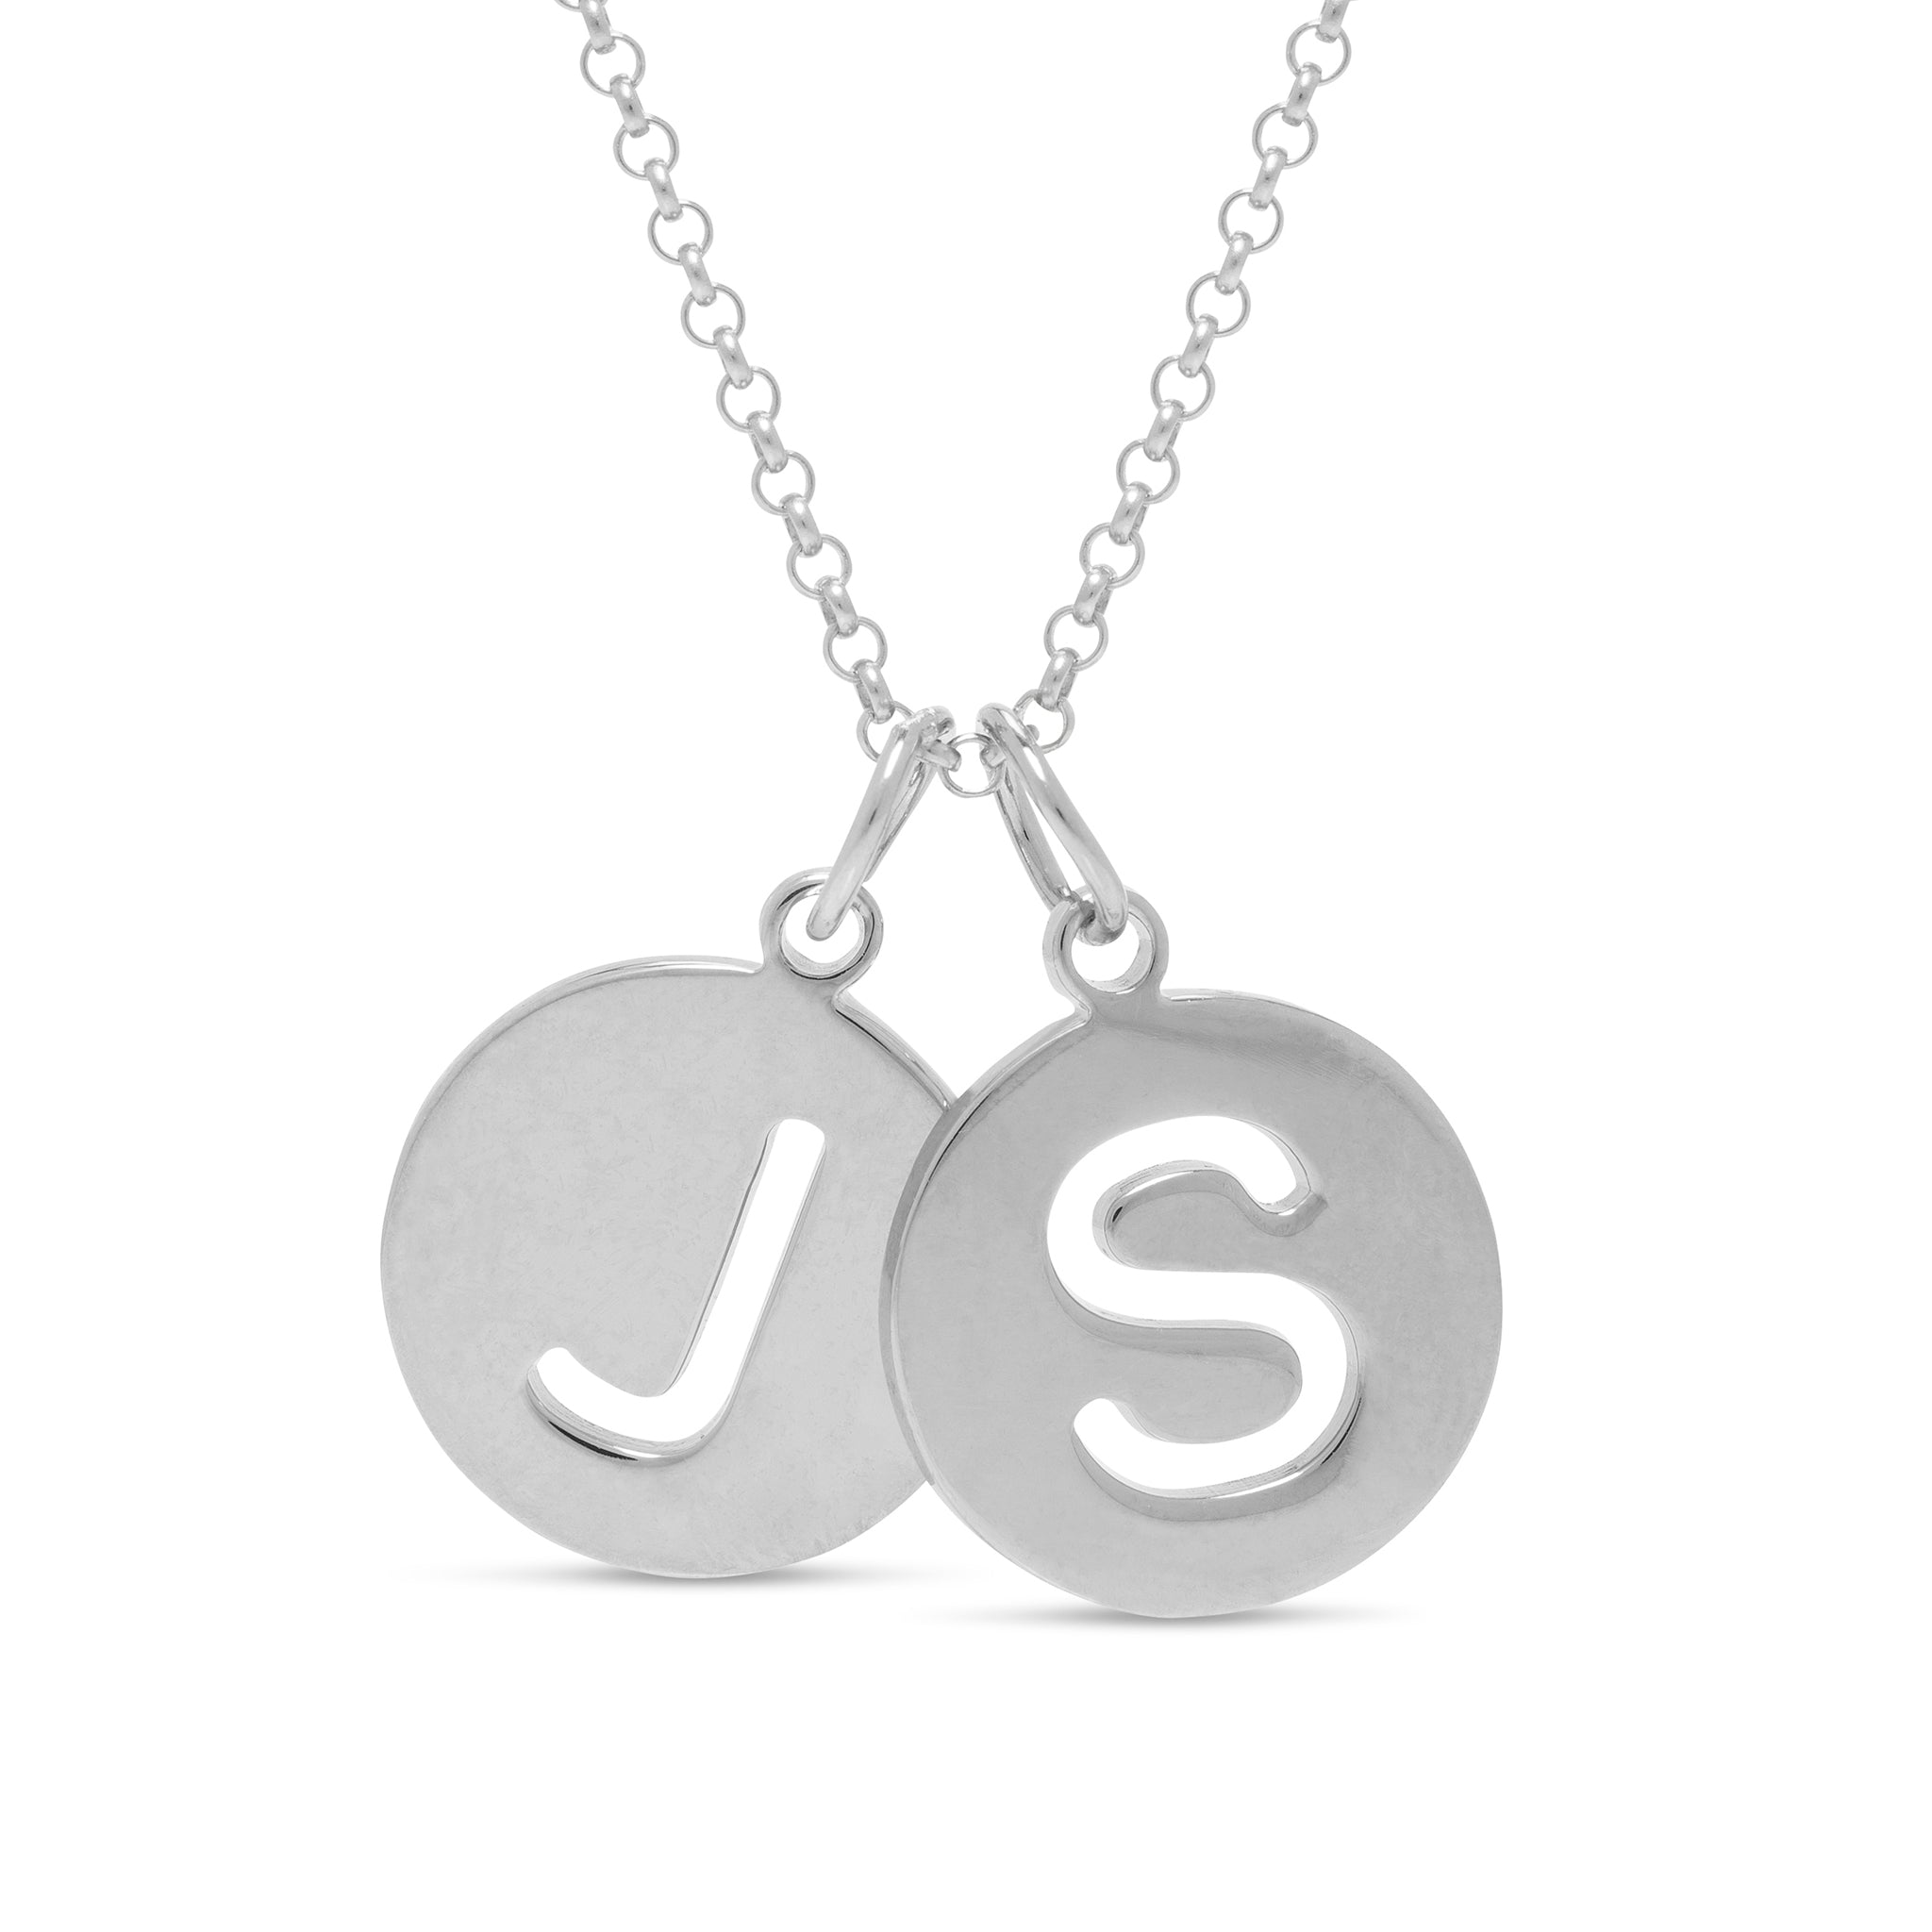 Holepunched Initial Disc Necklace